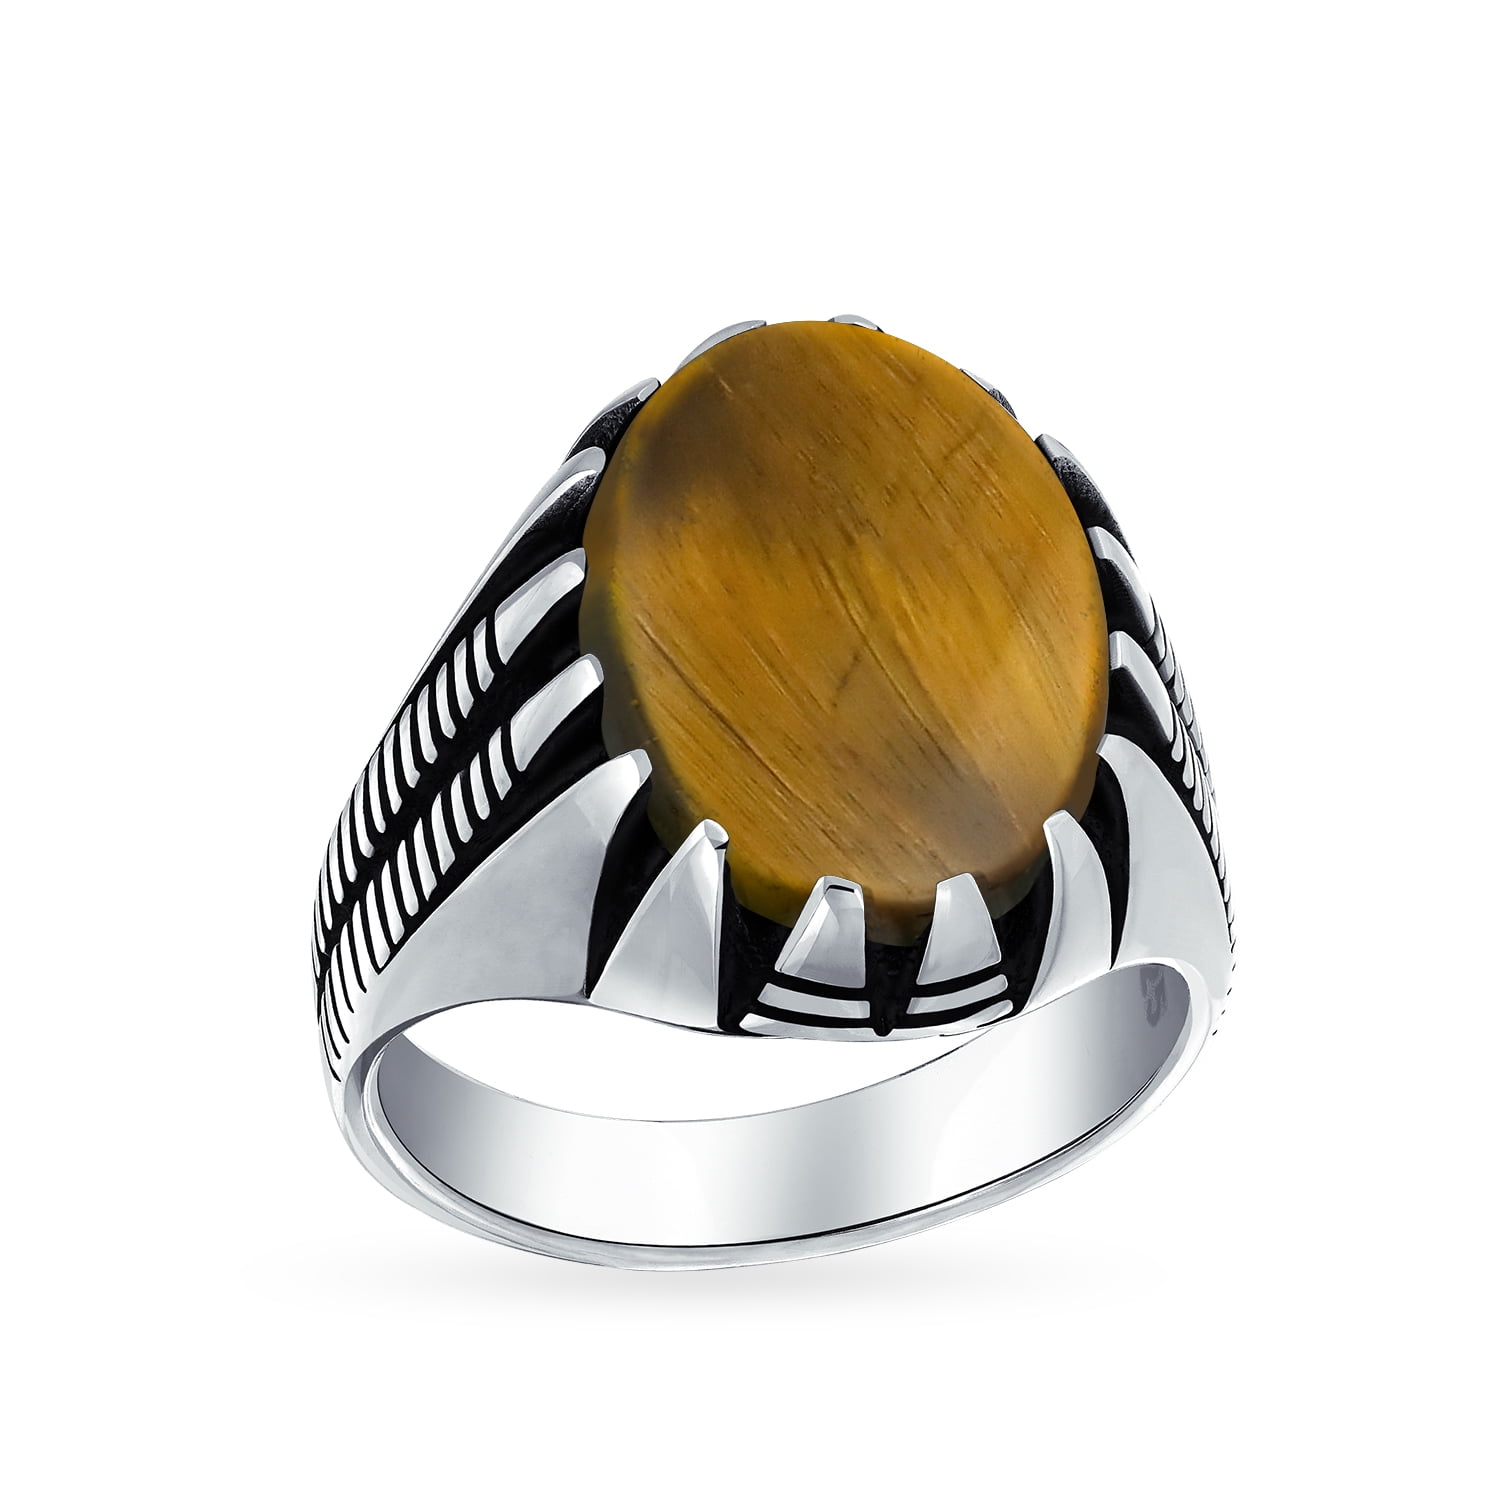 Solid 925 Sterling Silver Turkish Handmade Oval Tiger's Eye Stone Men's Ring 